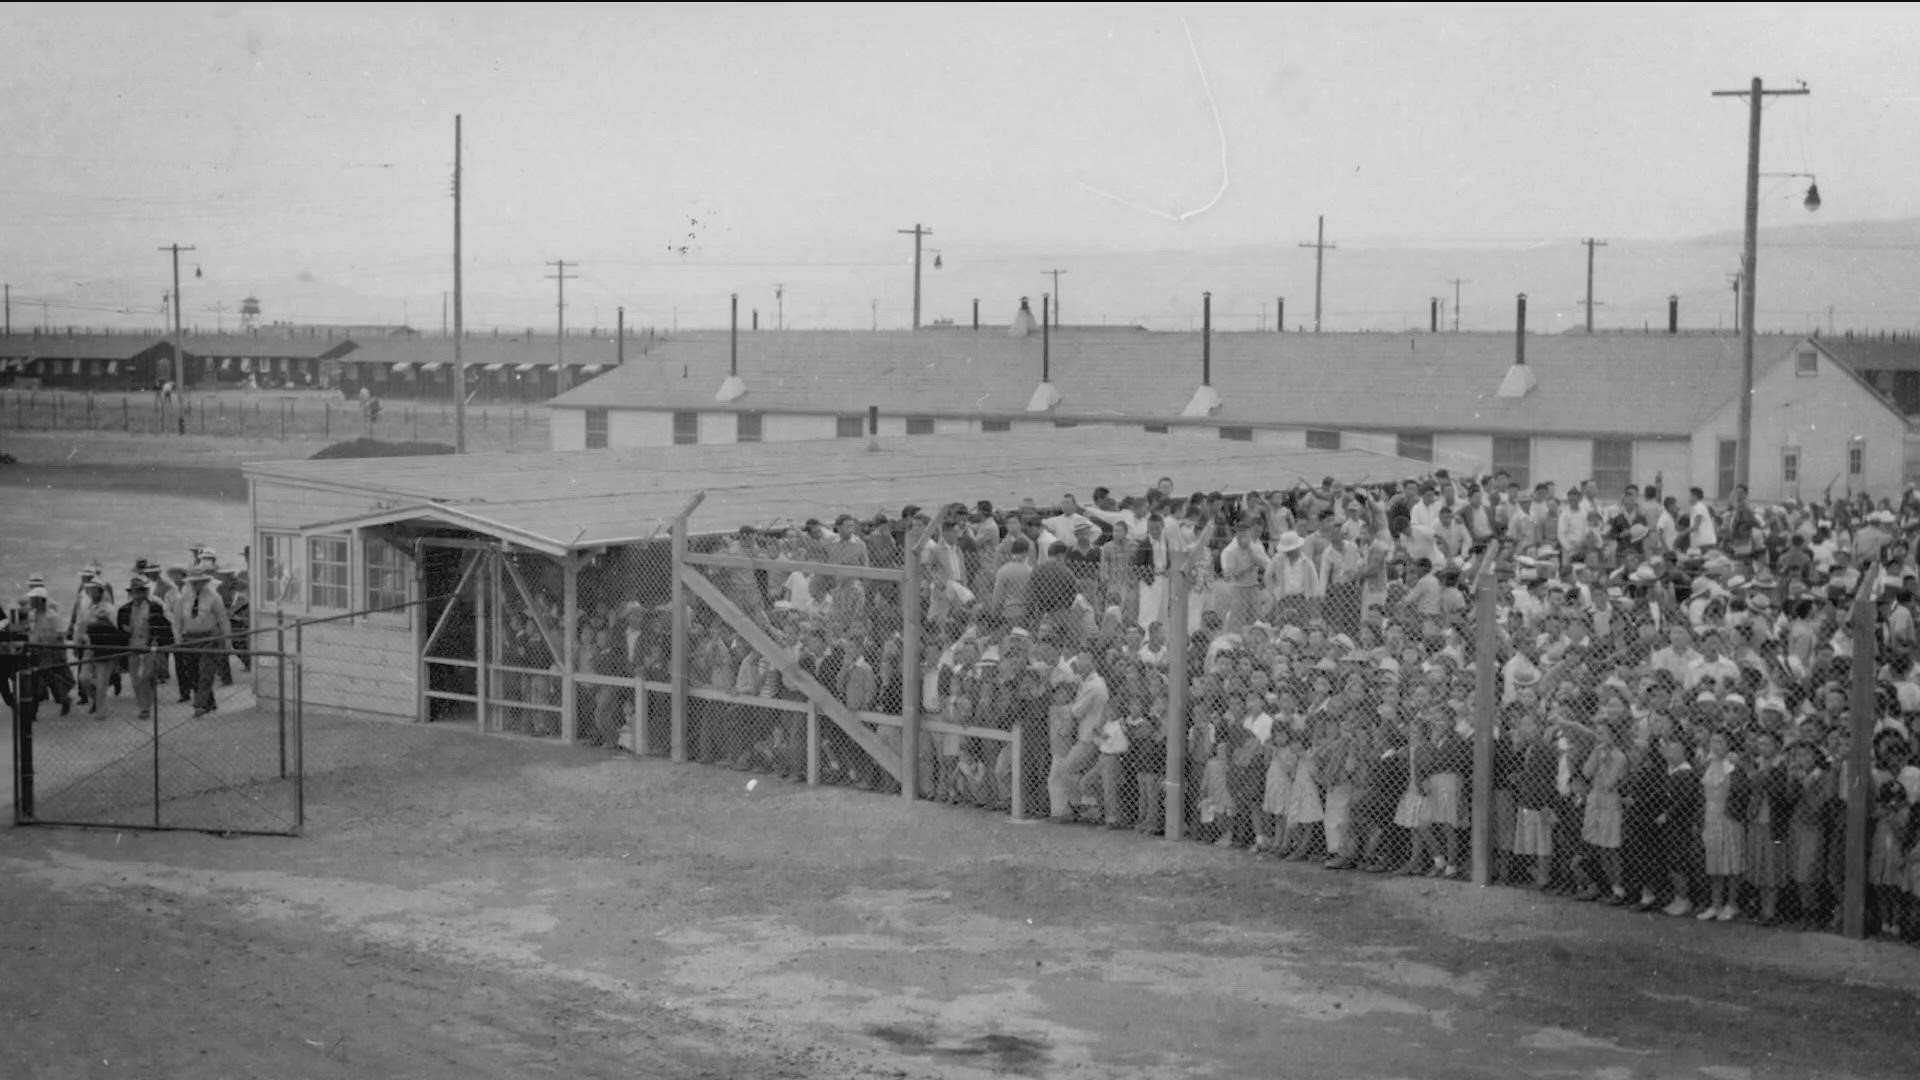 The order imprisoned Japanese Americans in interment camps. More than 13,000 were in a camp in Idaho. This Sunday there's a Day of Remembrance.